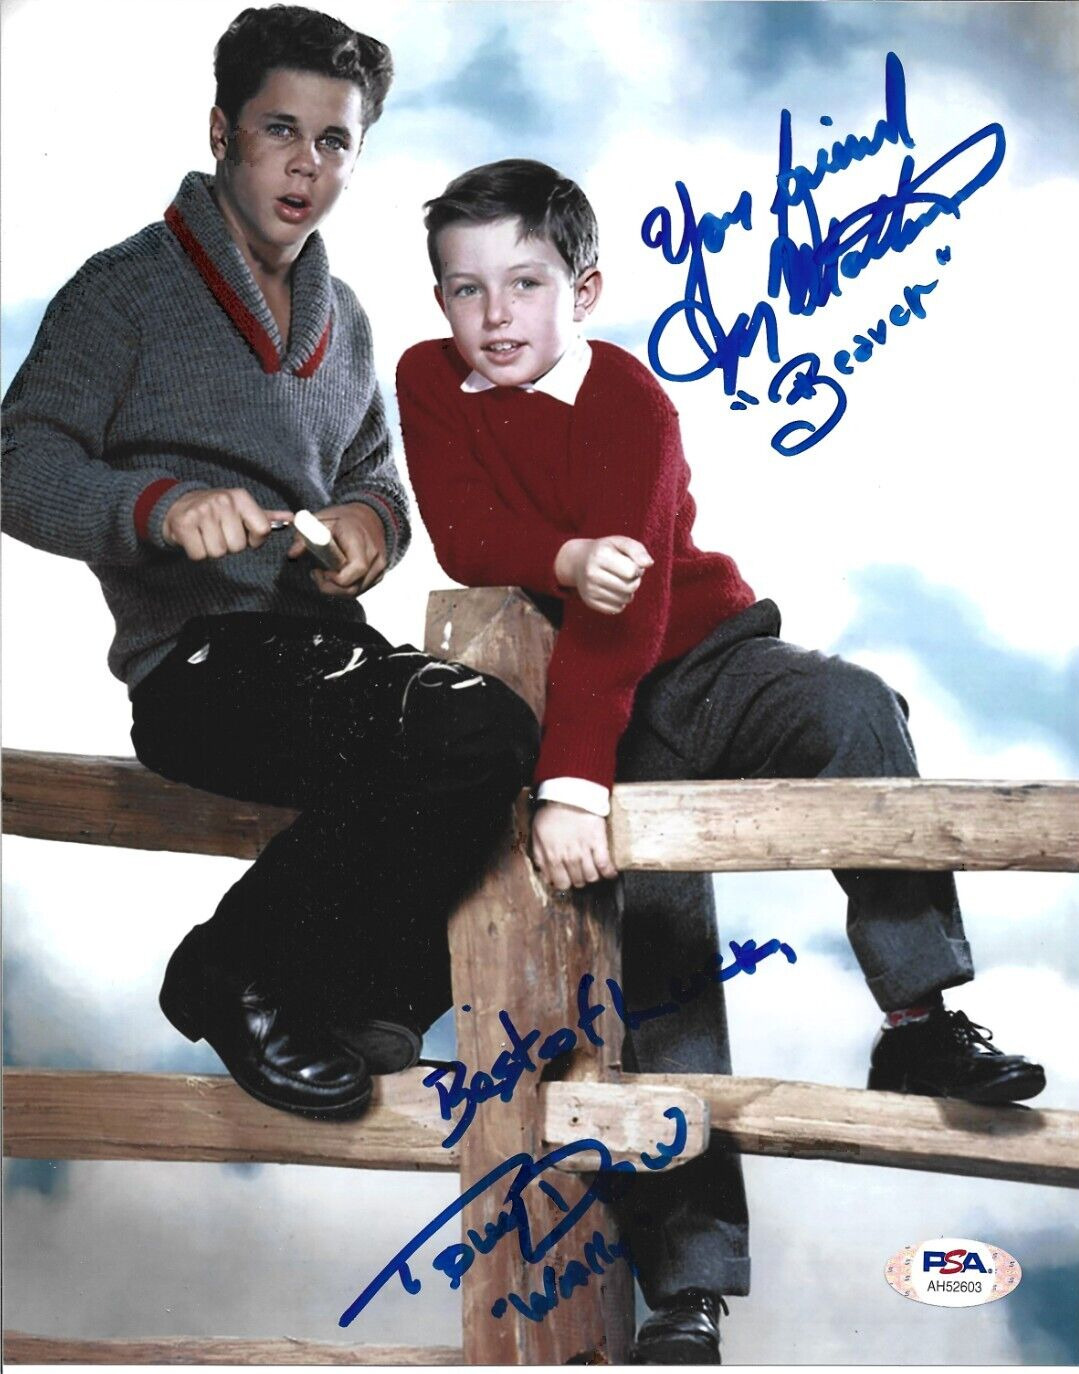 Jerry Mathers/Tony Dow Autographed 8x10 Photo With Inscriptions PSA/DNA